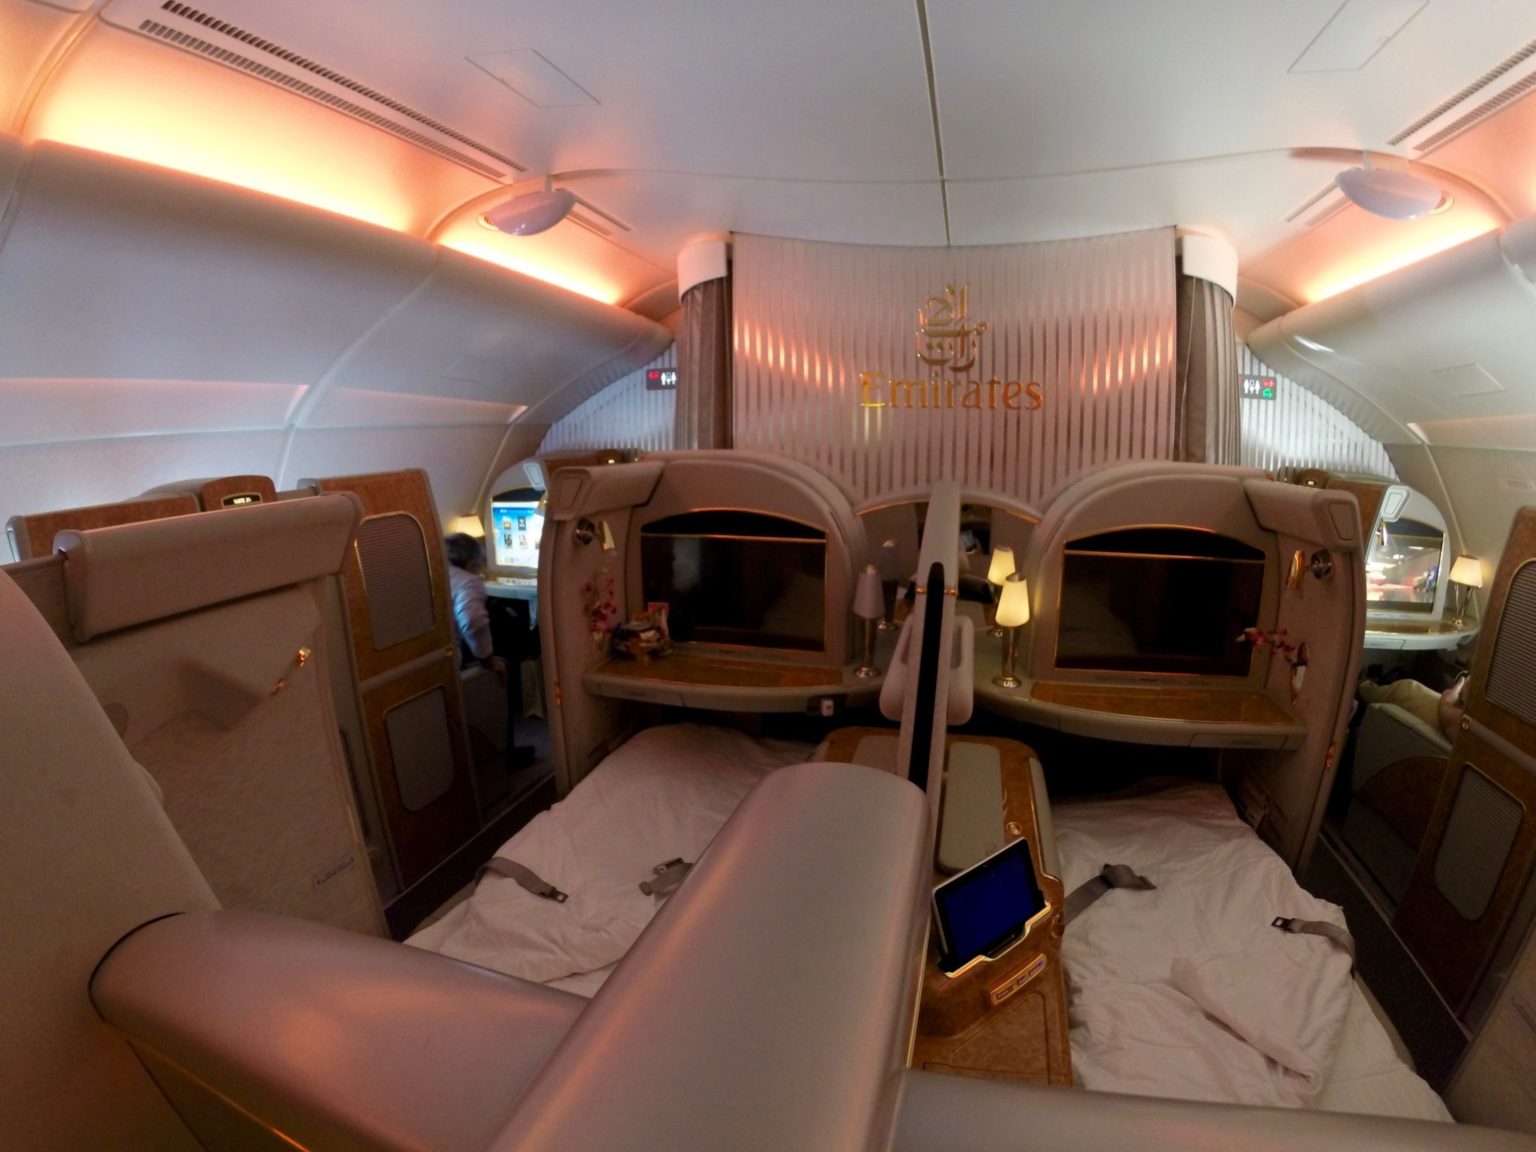 The 22 Best First Class Seats In The World For Couples [2021]